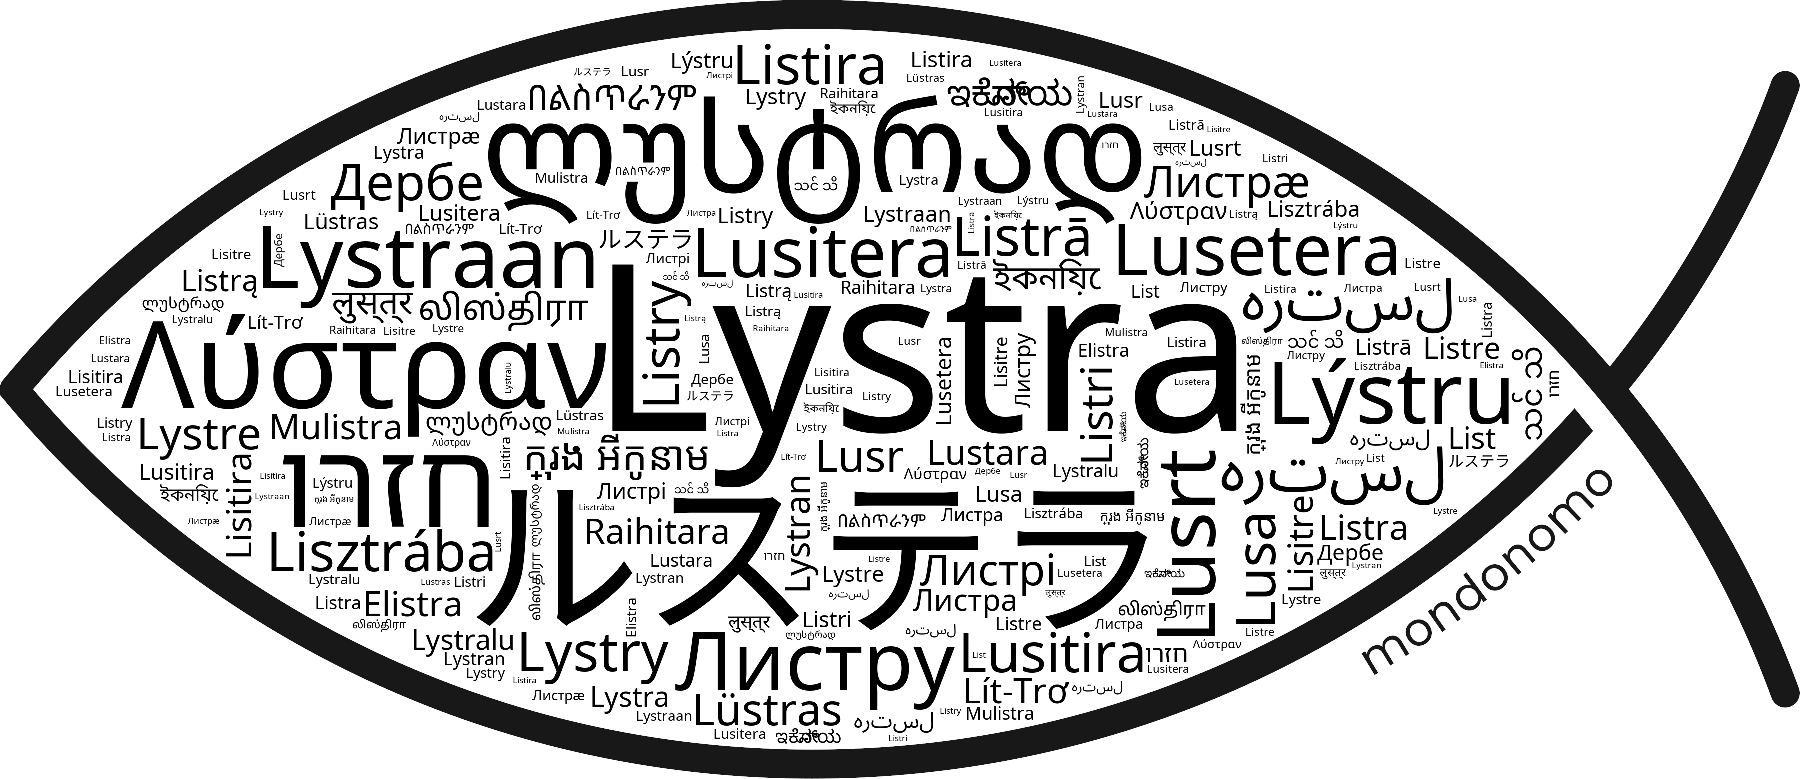 Name Lystra in the world's Bibles